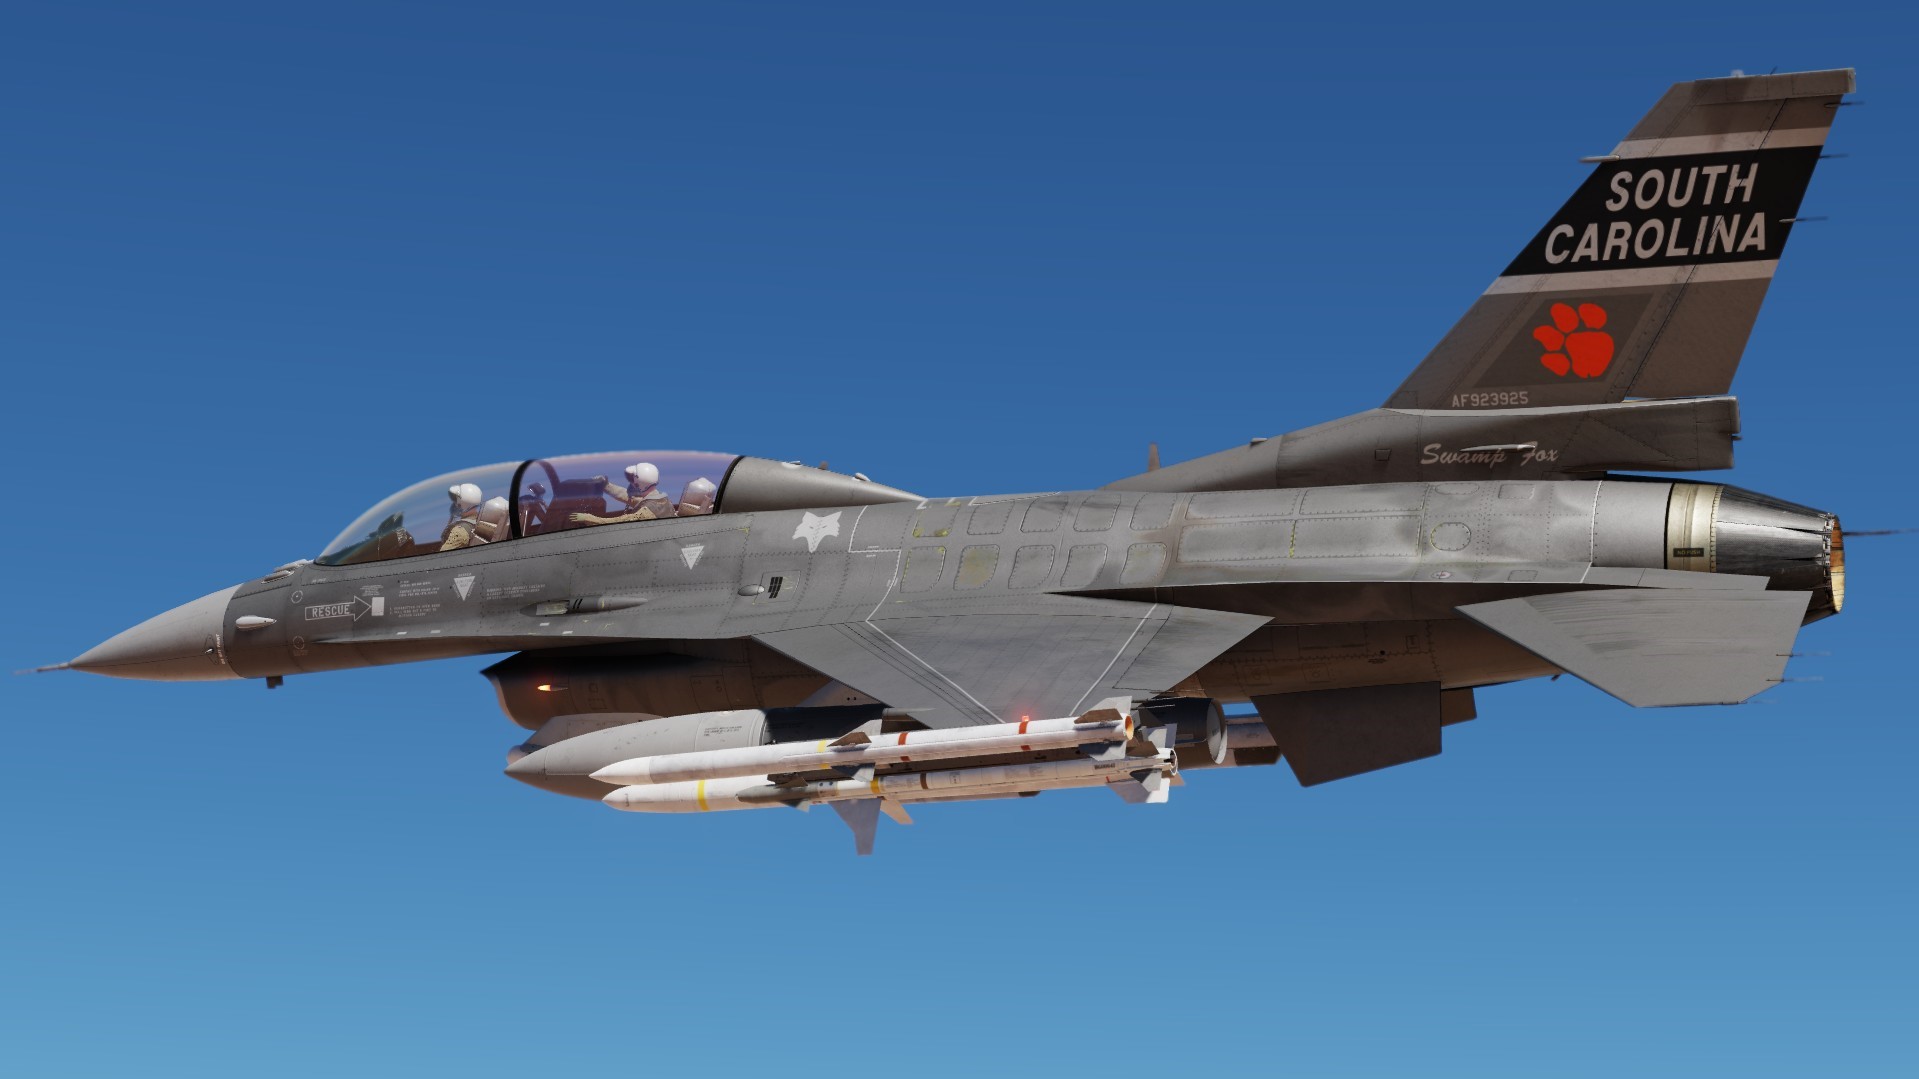 157th FS SC ANG F-16D Blk 52 HAVE GLASS